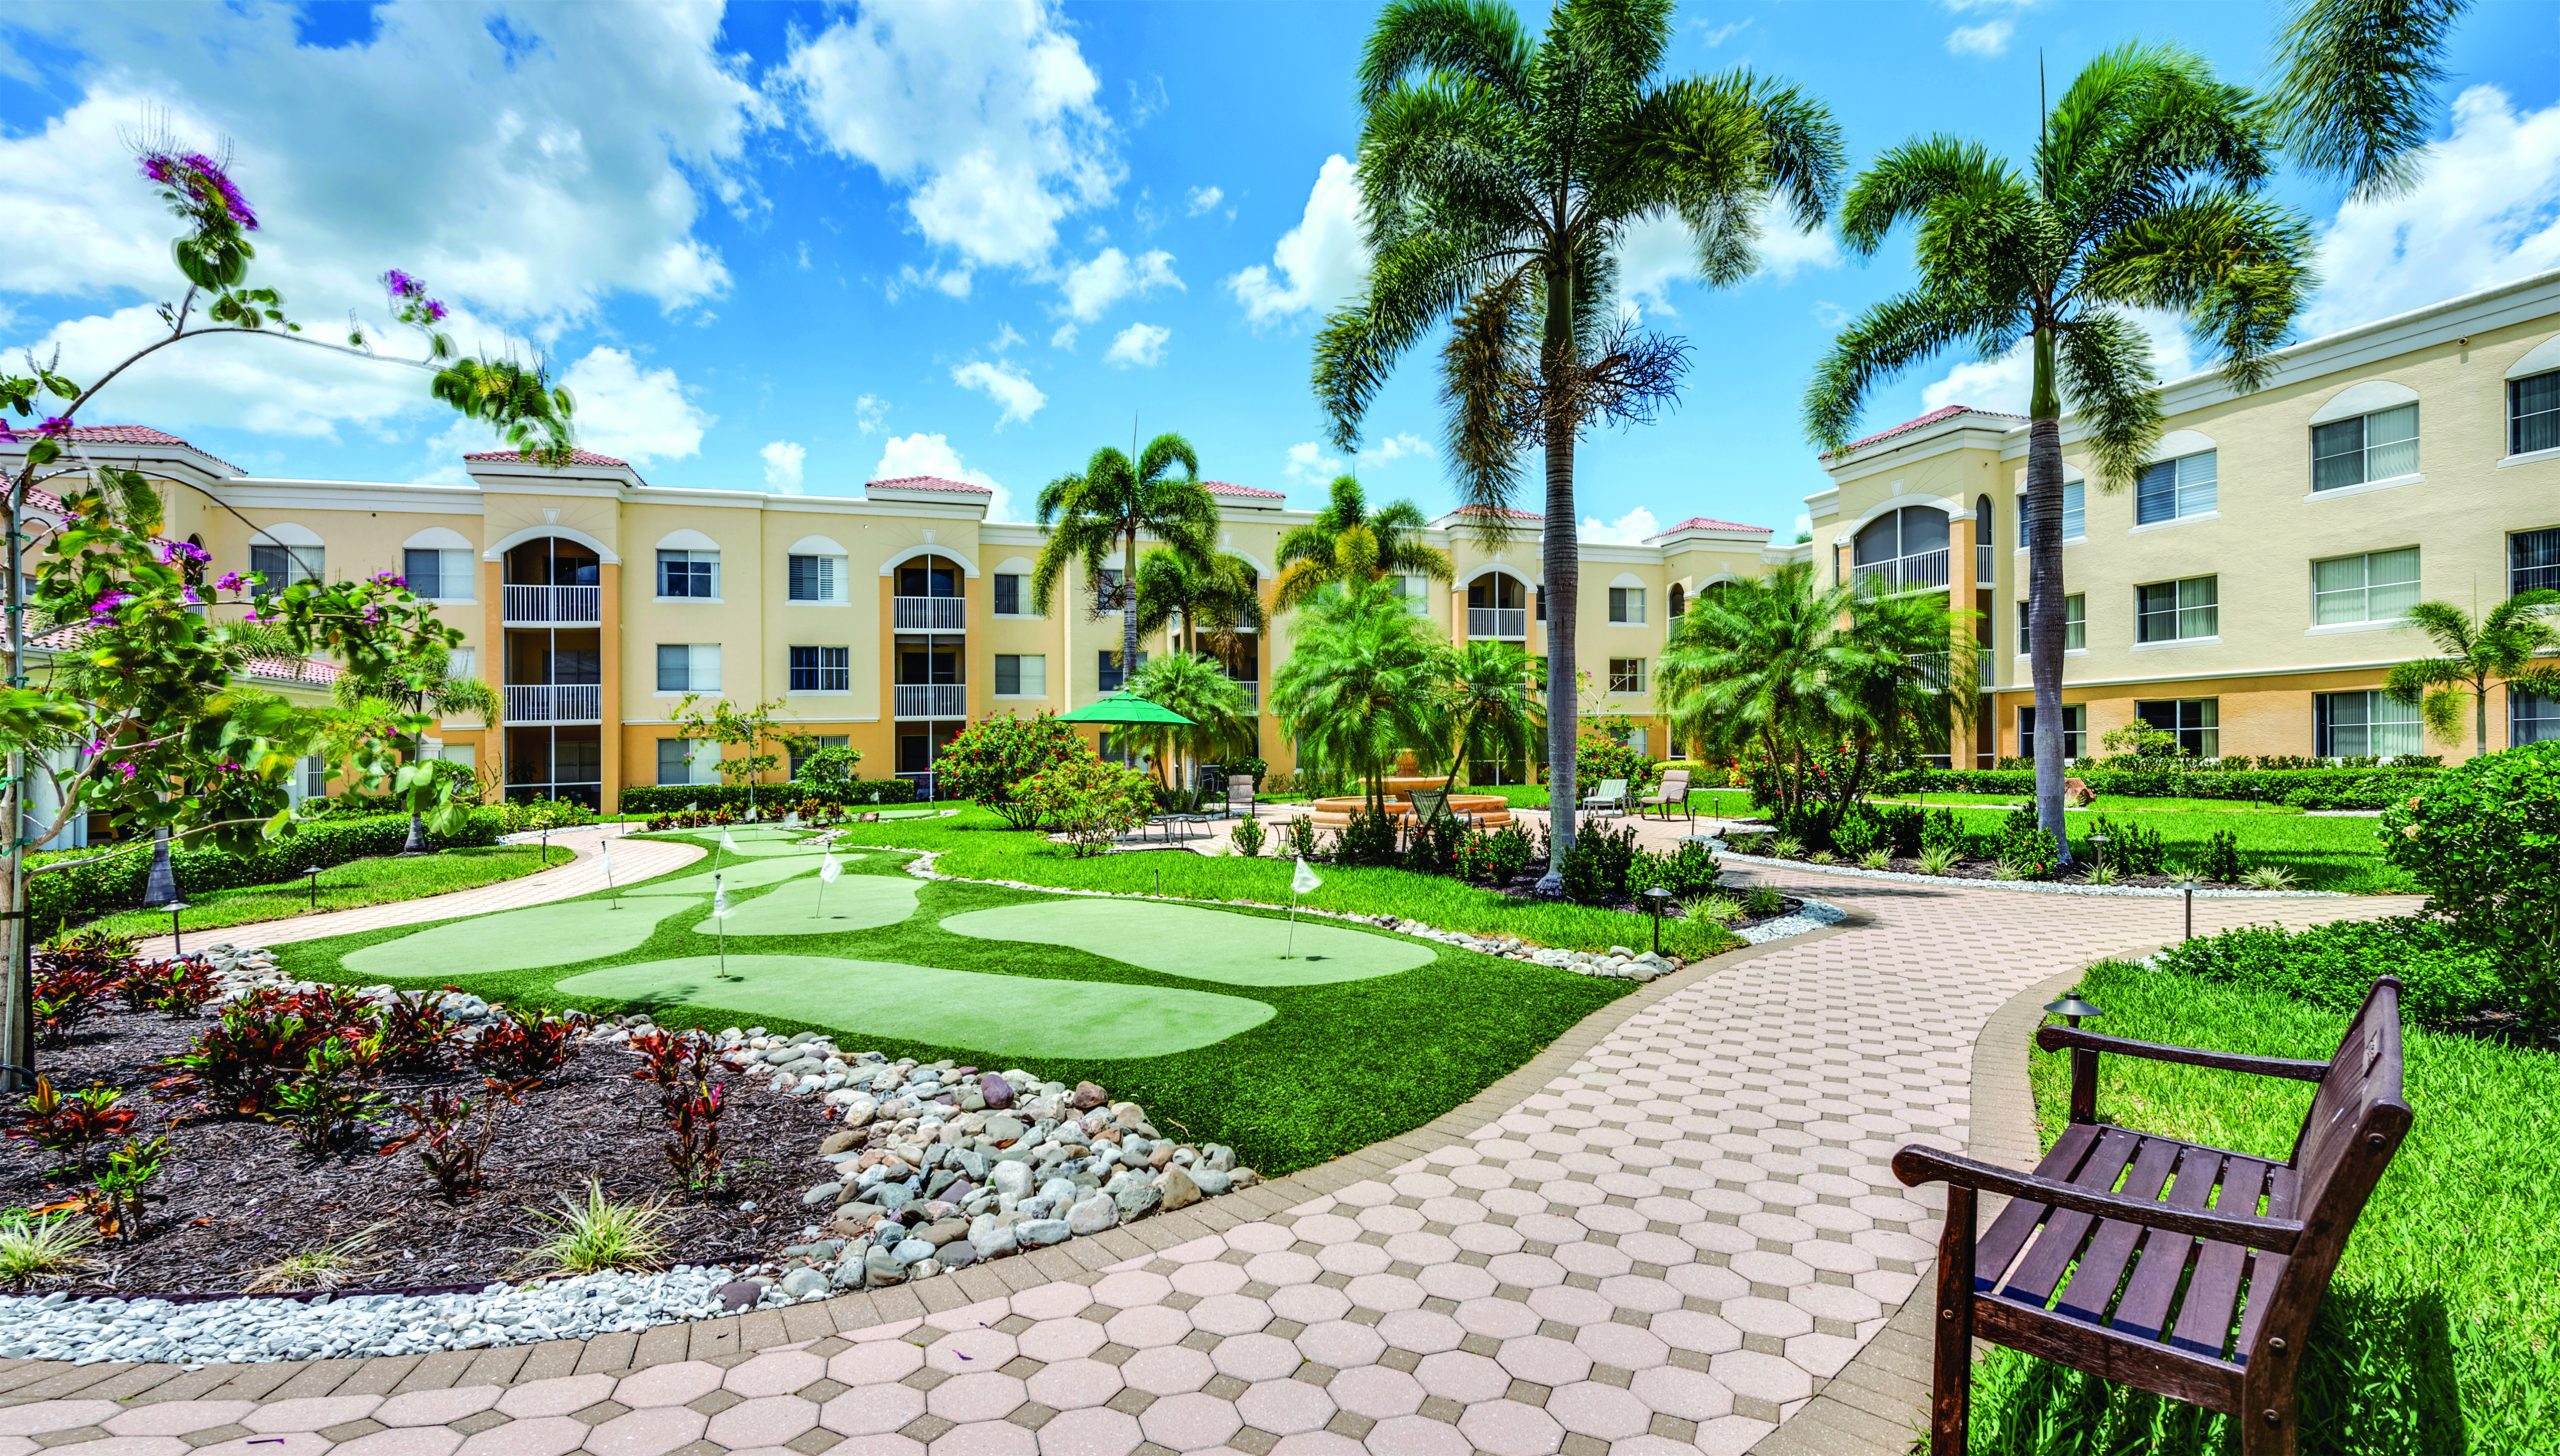 Luxurious courtyard view of a senior living community with landscaping and seating areas